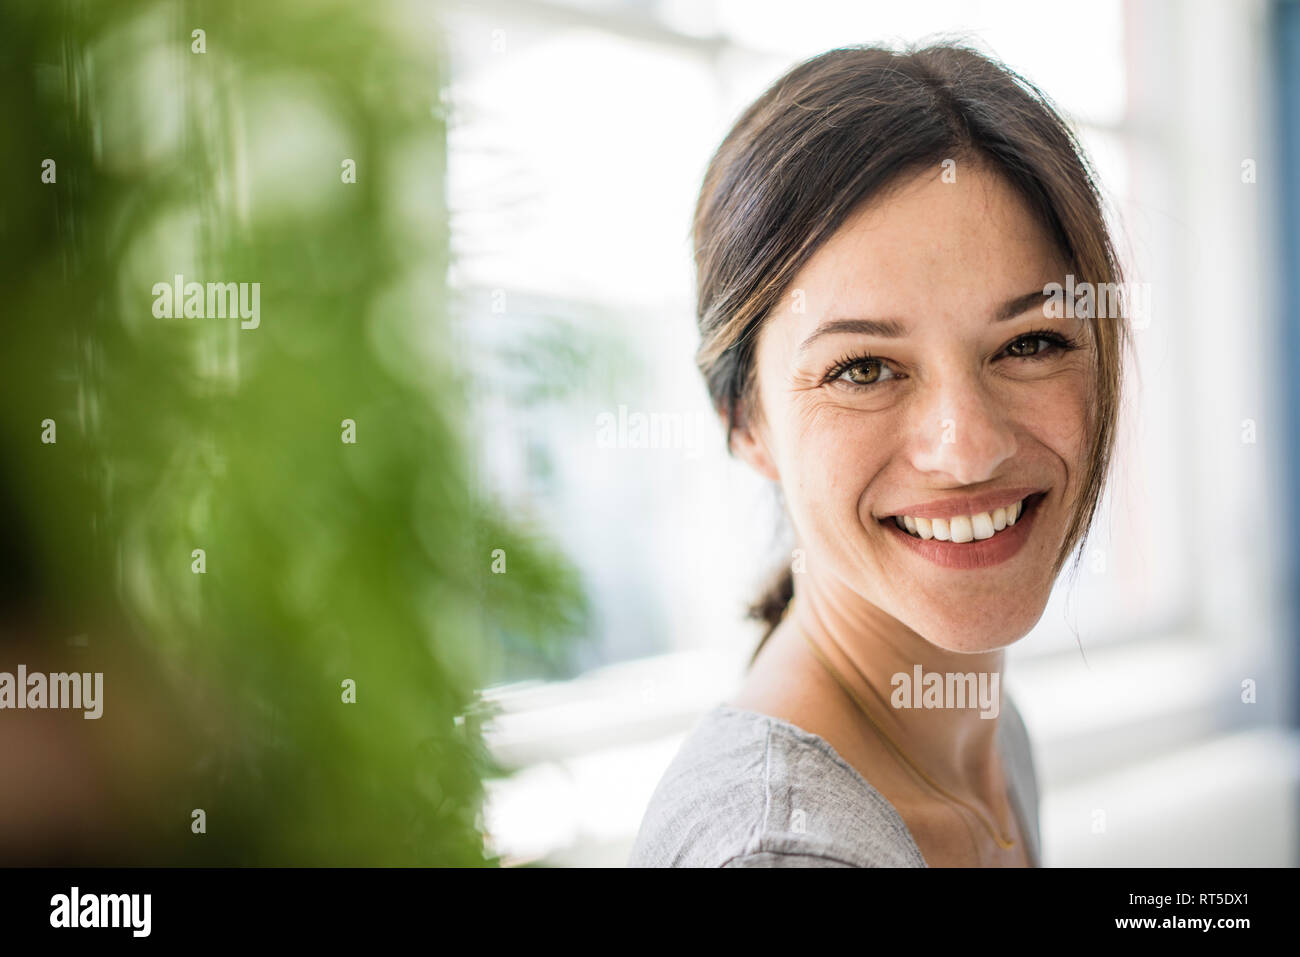 Portrait of a laughing woman Stock Photo